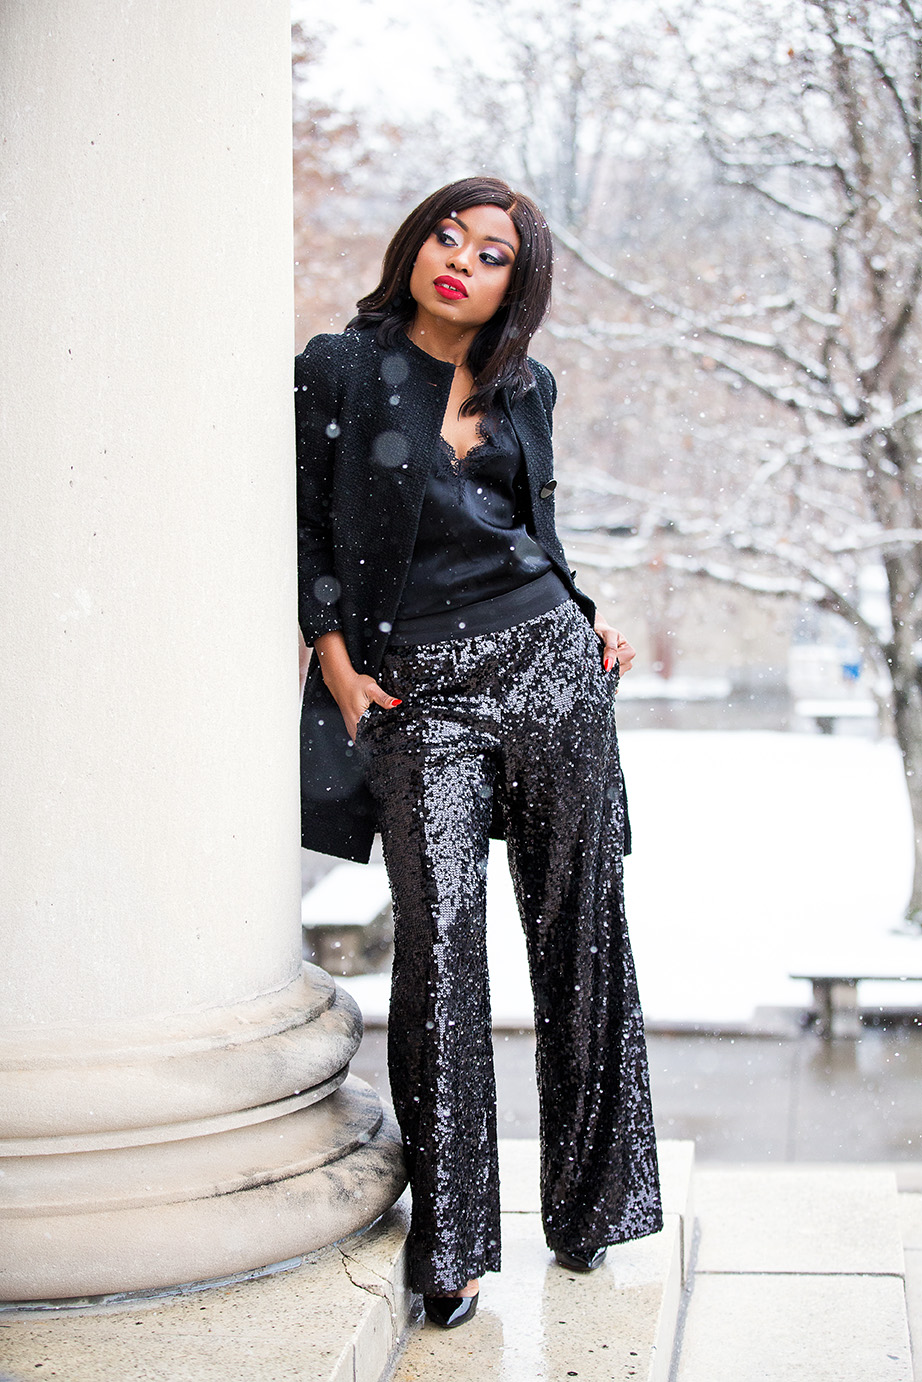 stella-adewunmi-of-jadore-fashion-share-holiday-glam-in-sequins-pants